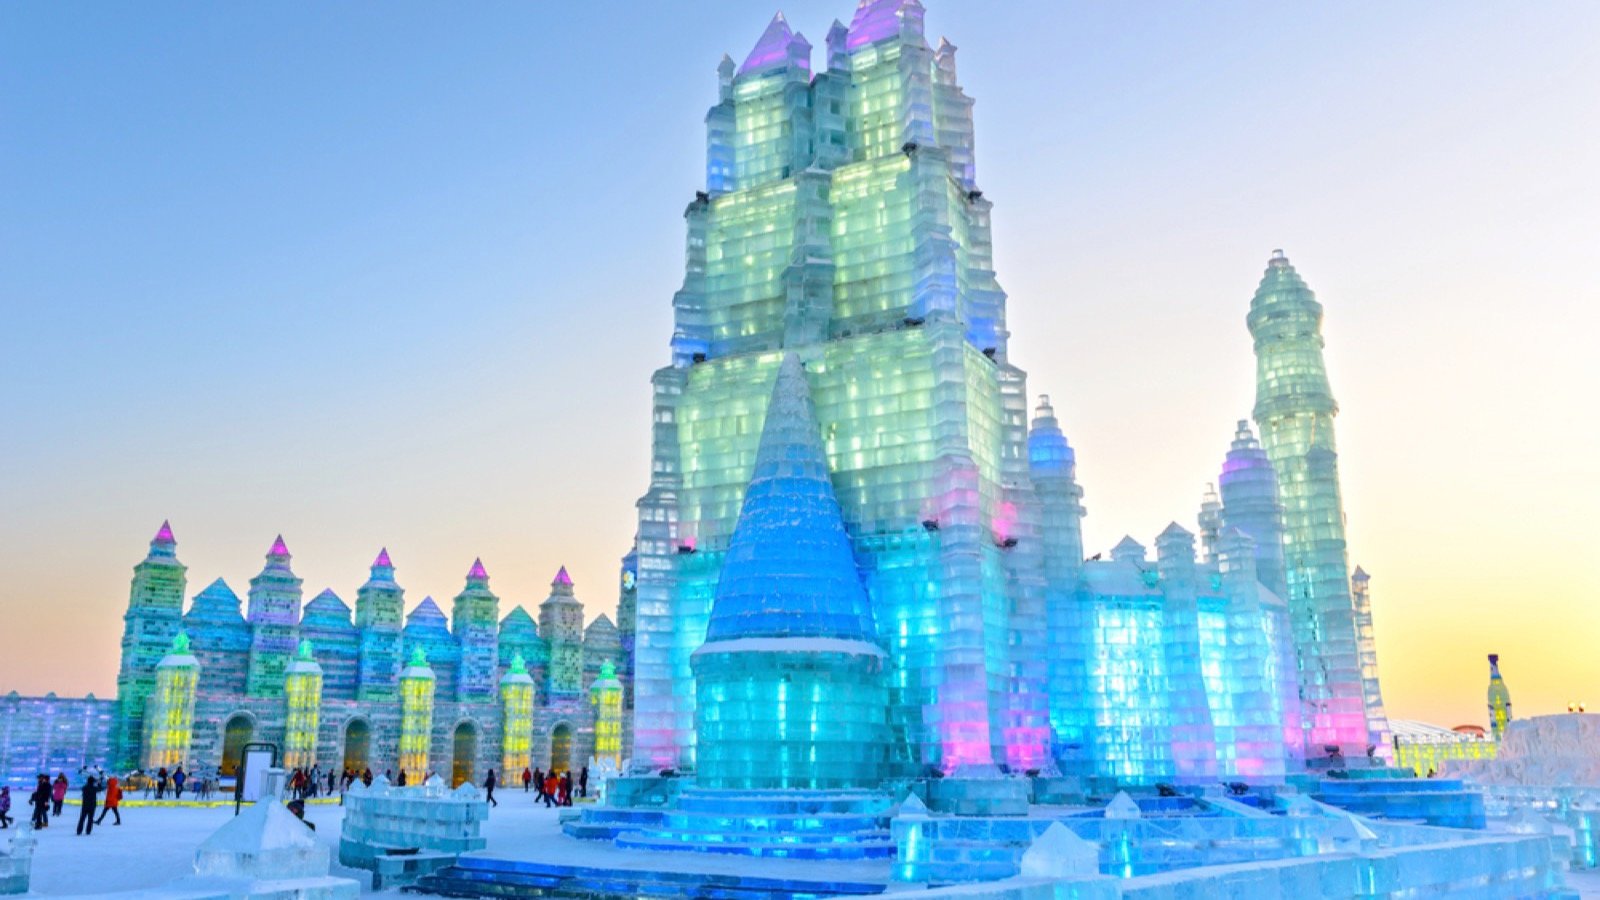 <p>Wear many layers to celebrate the summer in the northern city of Harbin. This Arctic city hosts one of the most famous winter festivals in the world. The festival lasts for a full month, and attendees can come to stare in awe at some of the biggest and most creative ice sculptures of all time. Stroll through cities made of ice or hit the slopes for world-class skiing.</p><p>Source: <a href="https://greenglobaltravel.com/best-cultural-festivals-around-the-world/">Greenglobaltravel</a></p><p>Source: <a href="https://hiddenlemur.com/cultural-festivals-around-the-world/">Hiddenlemur</a></p>